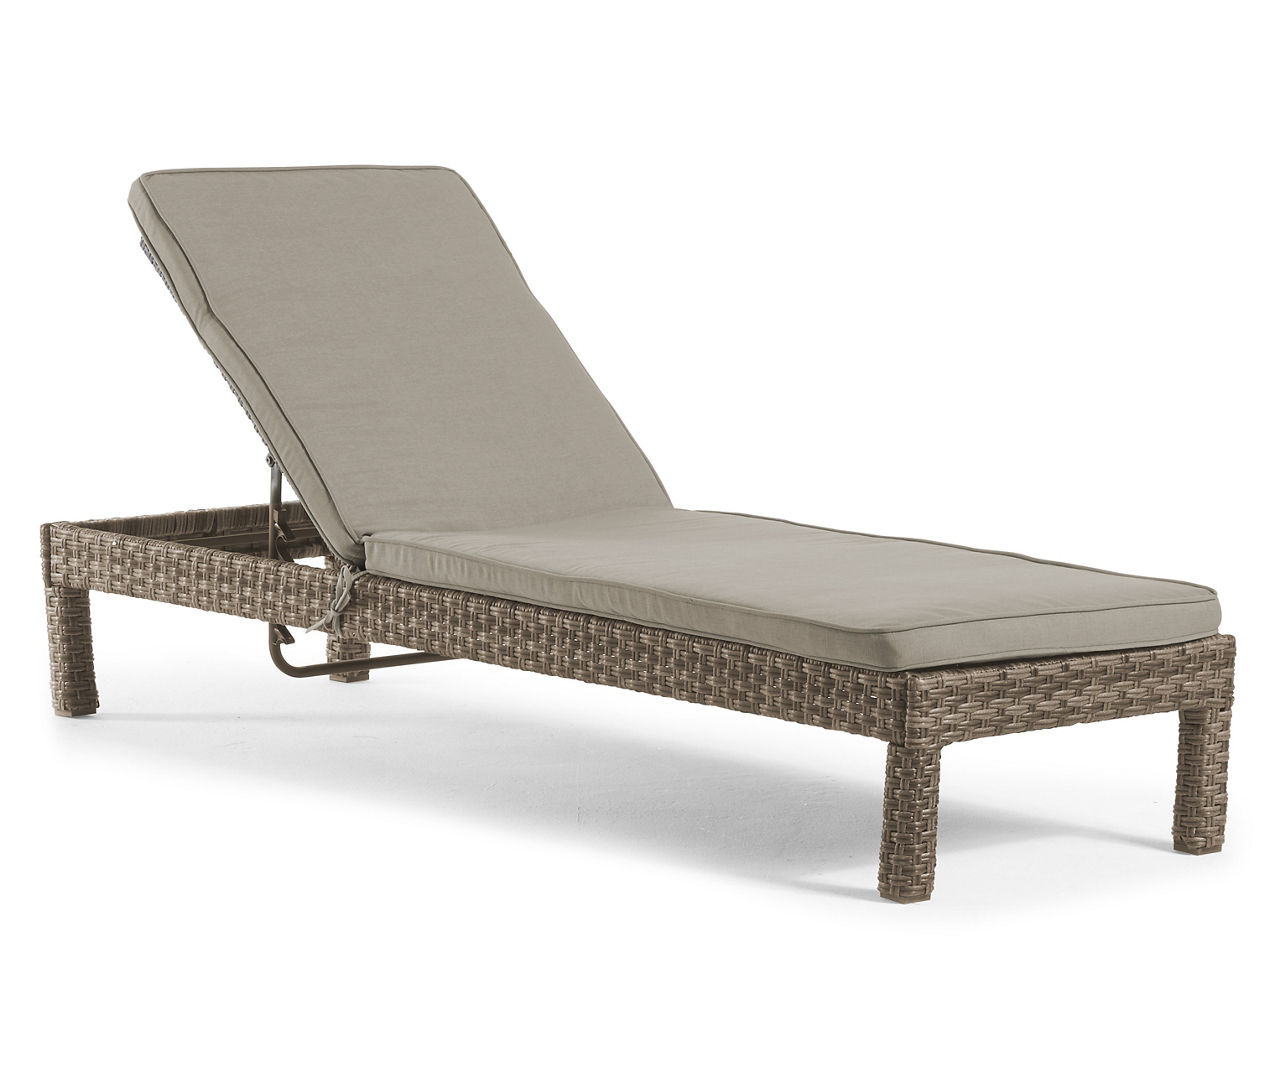 Eagle Brooke Tan All-Weather Wicker Cushioned Chaise Lounger